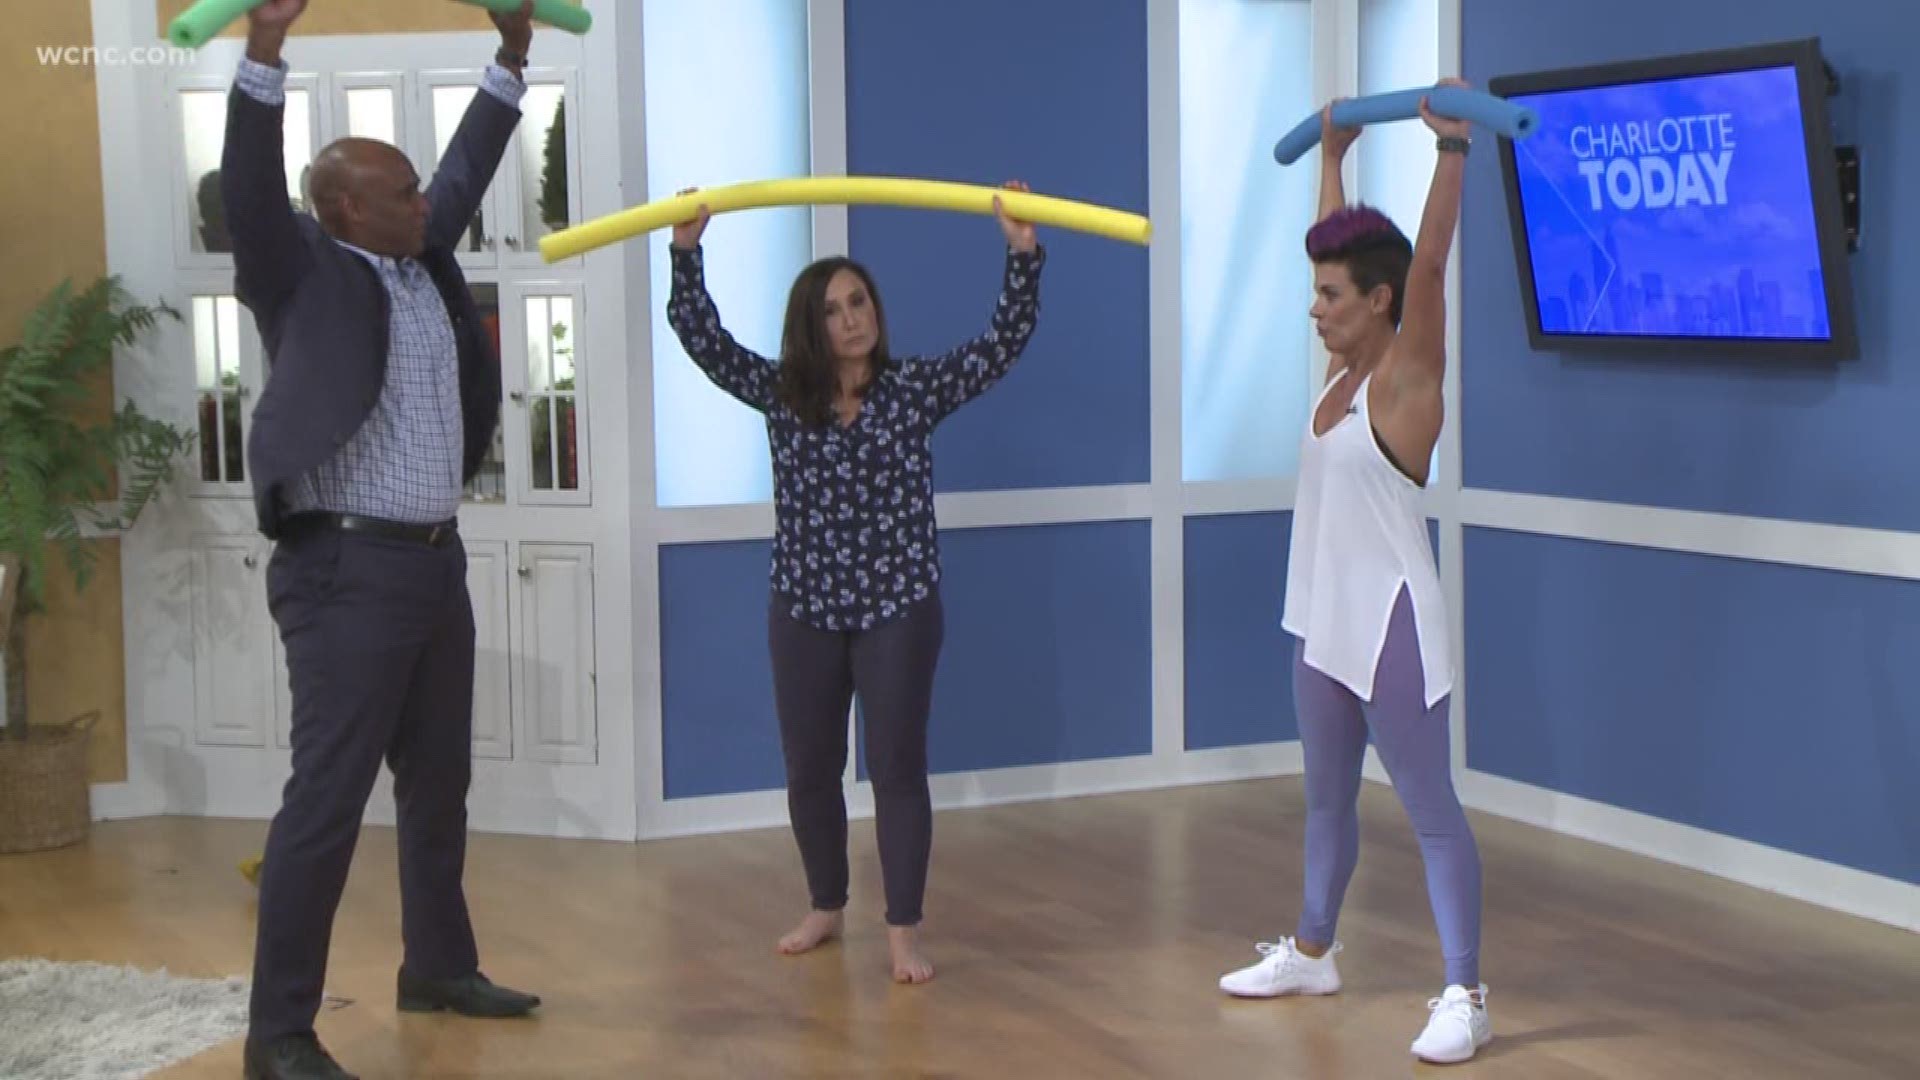 Trainer, Lynn Fernandez, shows us how to get a killer workout in by the pool or at home using just a pool noodle.